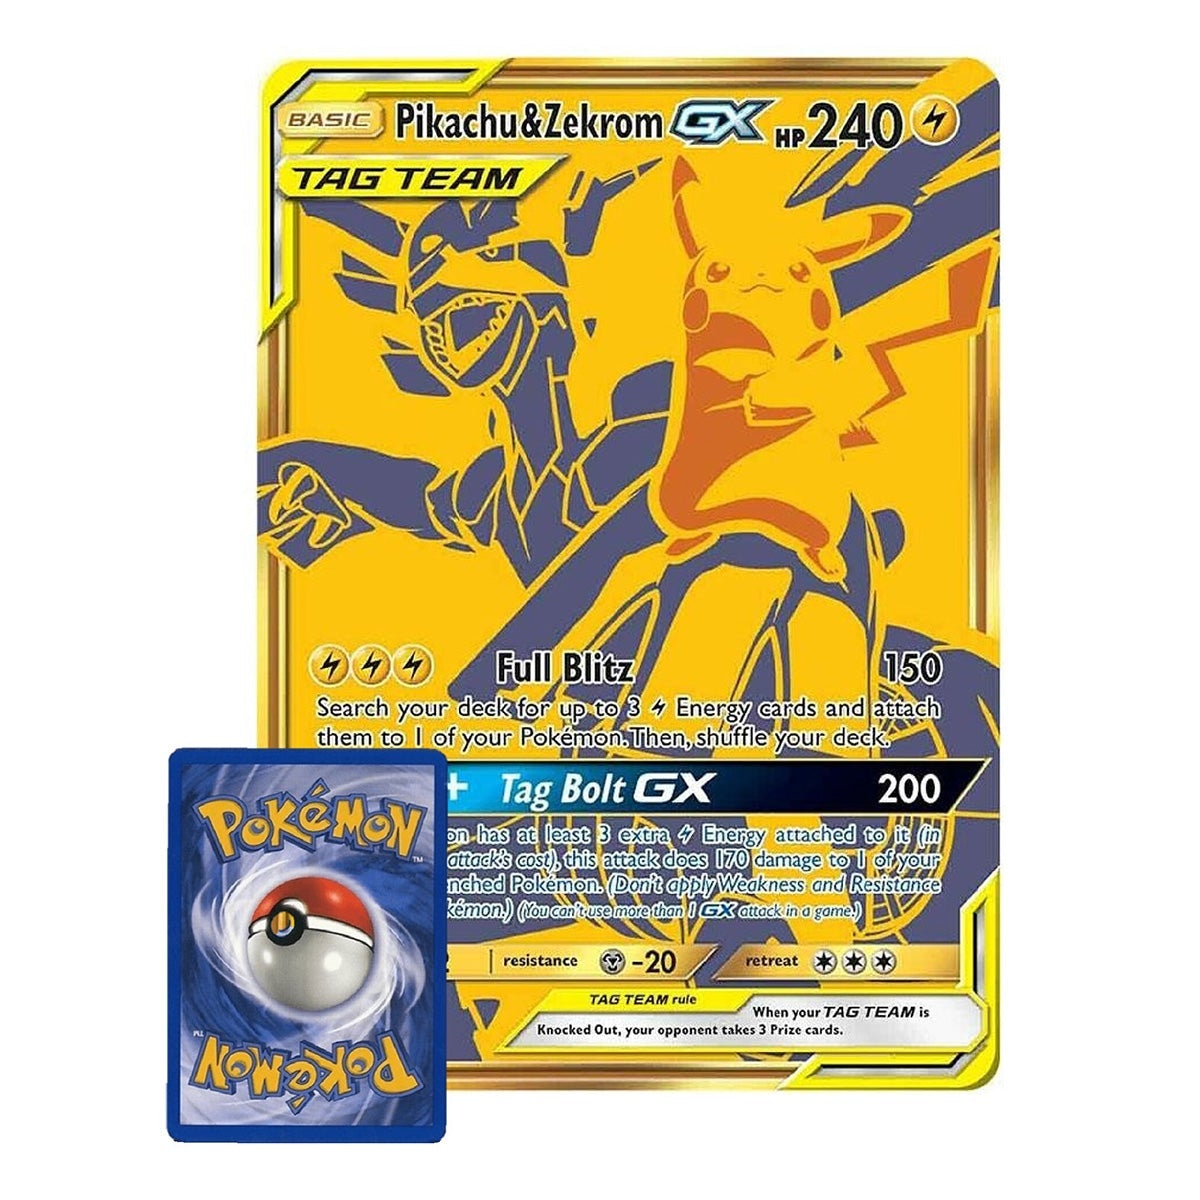 2022 New Pokemon Gold Metal Flash Card Eevee Sylveon Mewtwo Mew Pikachu  Game Battle Collection Collectible Card Children's Toy